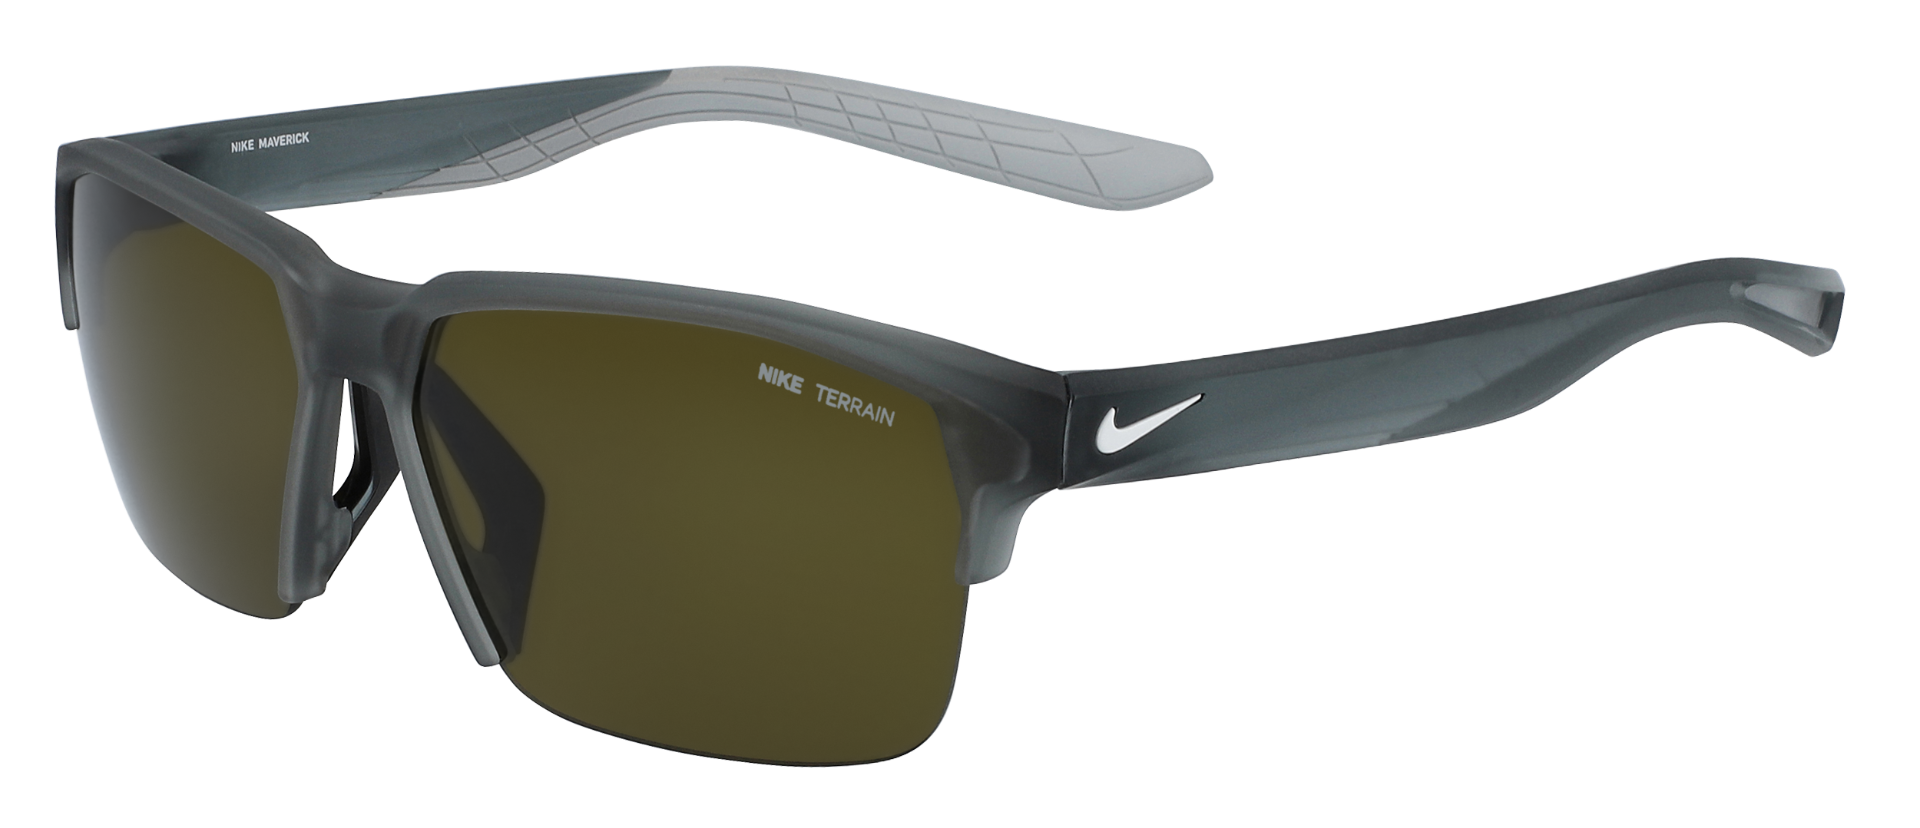 Nike sunglasses with interchangeable lenses featuring the Maverick Free frame. Matte grey and white frame with square interchangeable lenses in greenish tint.